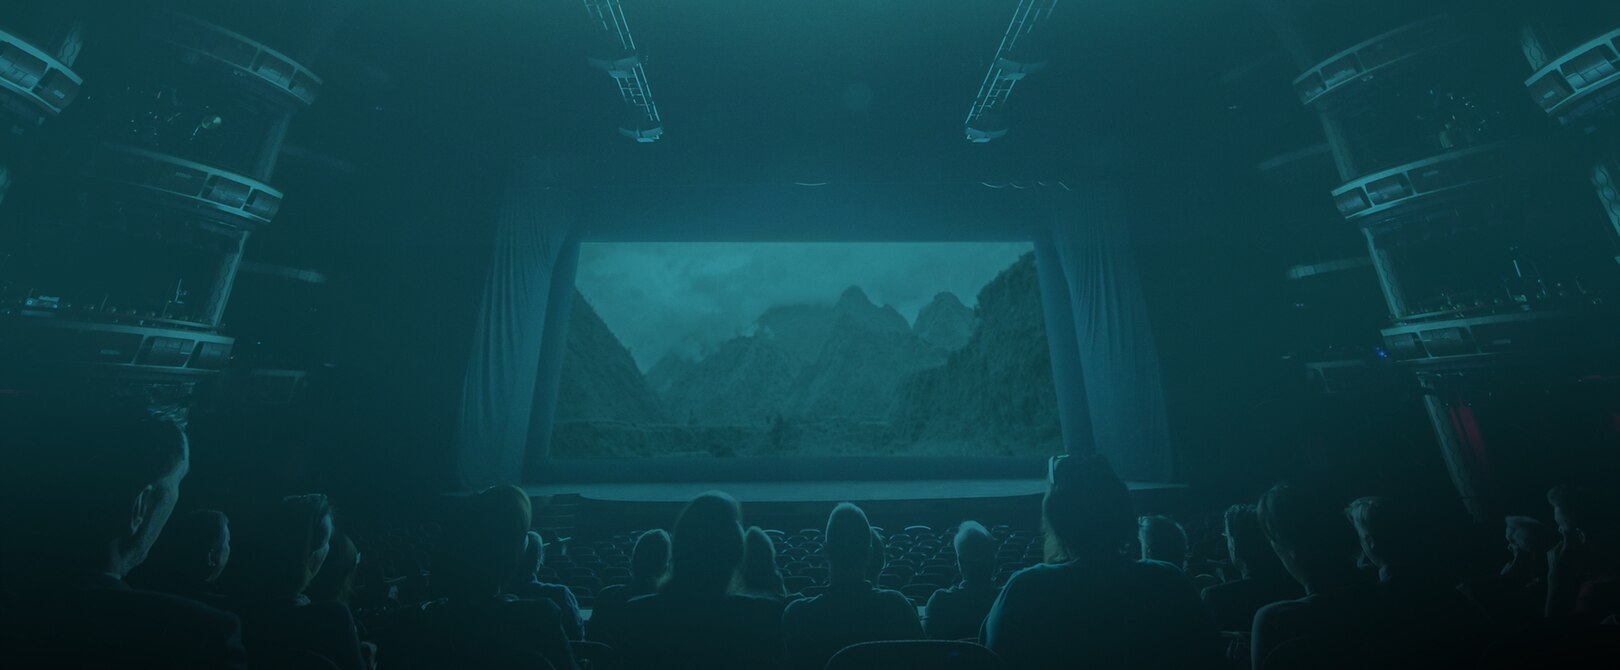 dolby atmos movies on netflix 2021